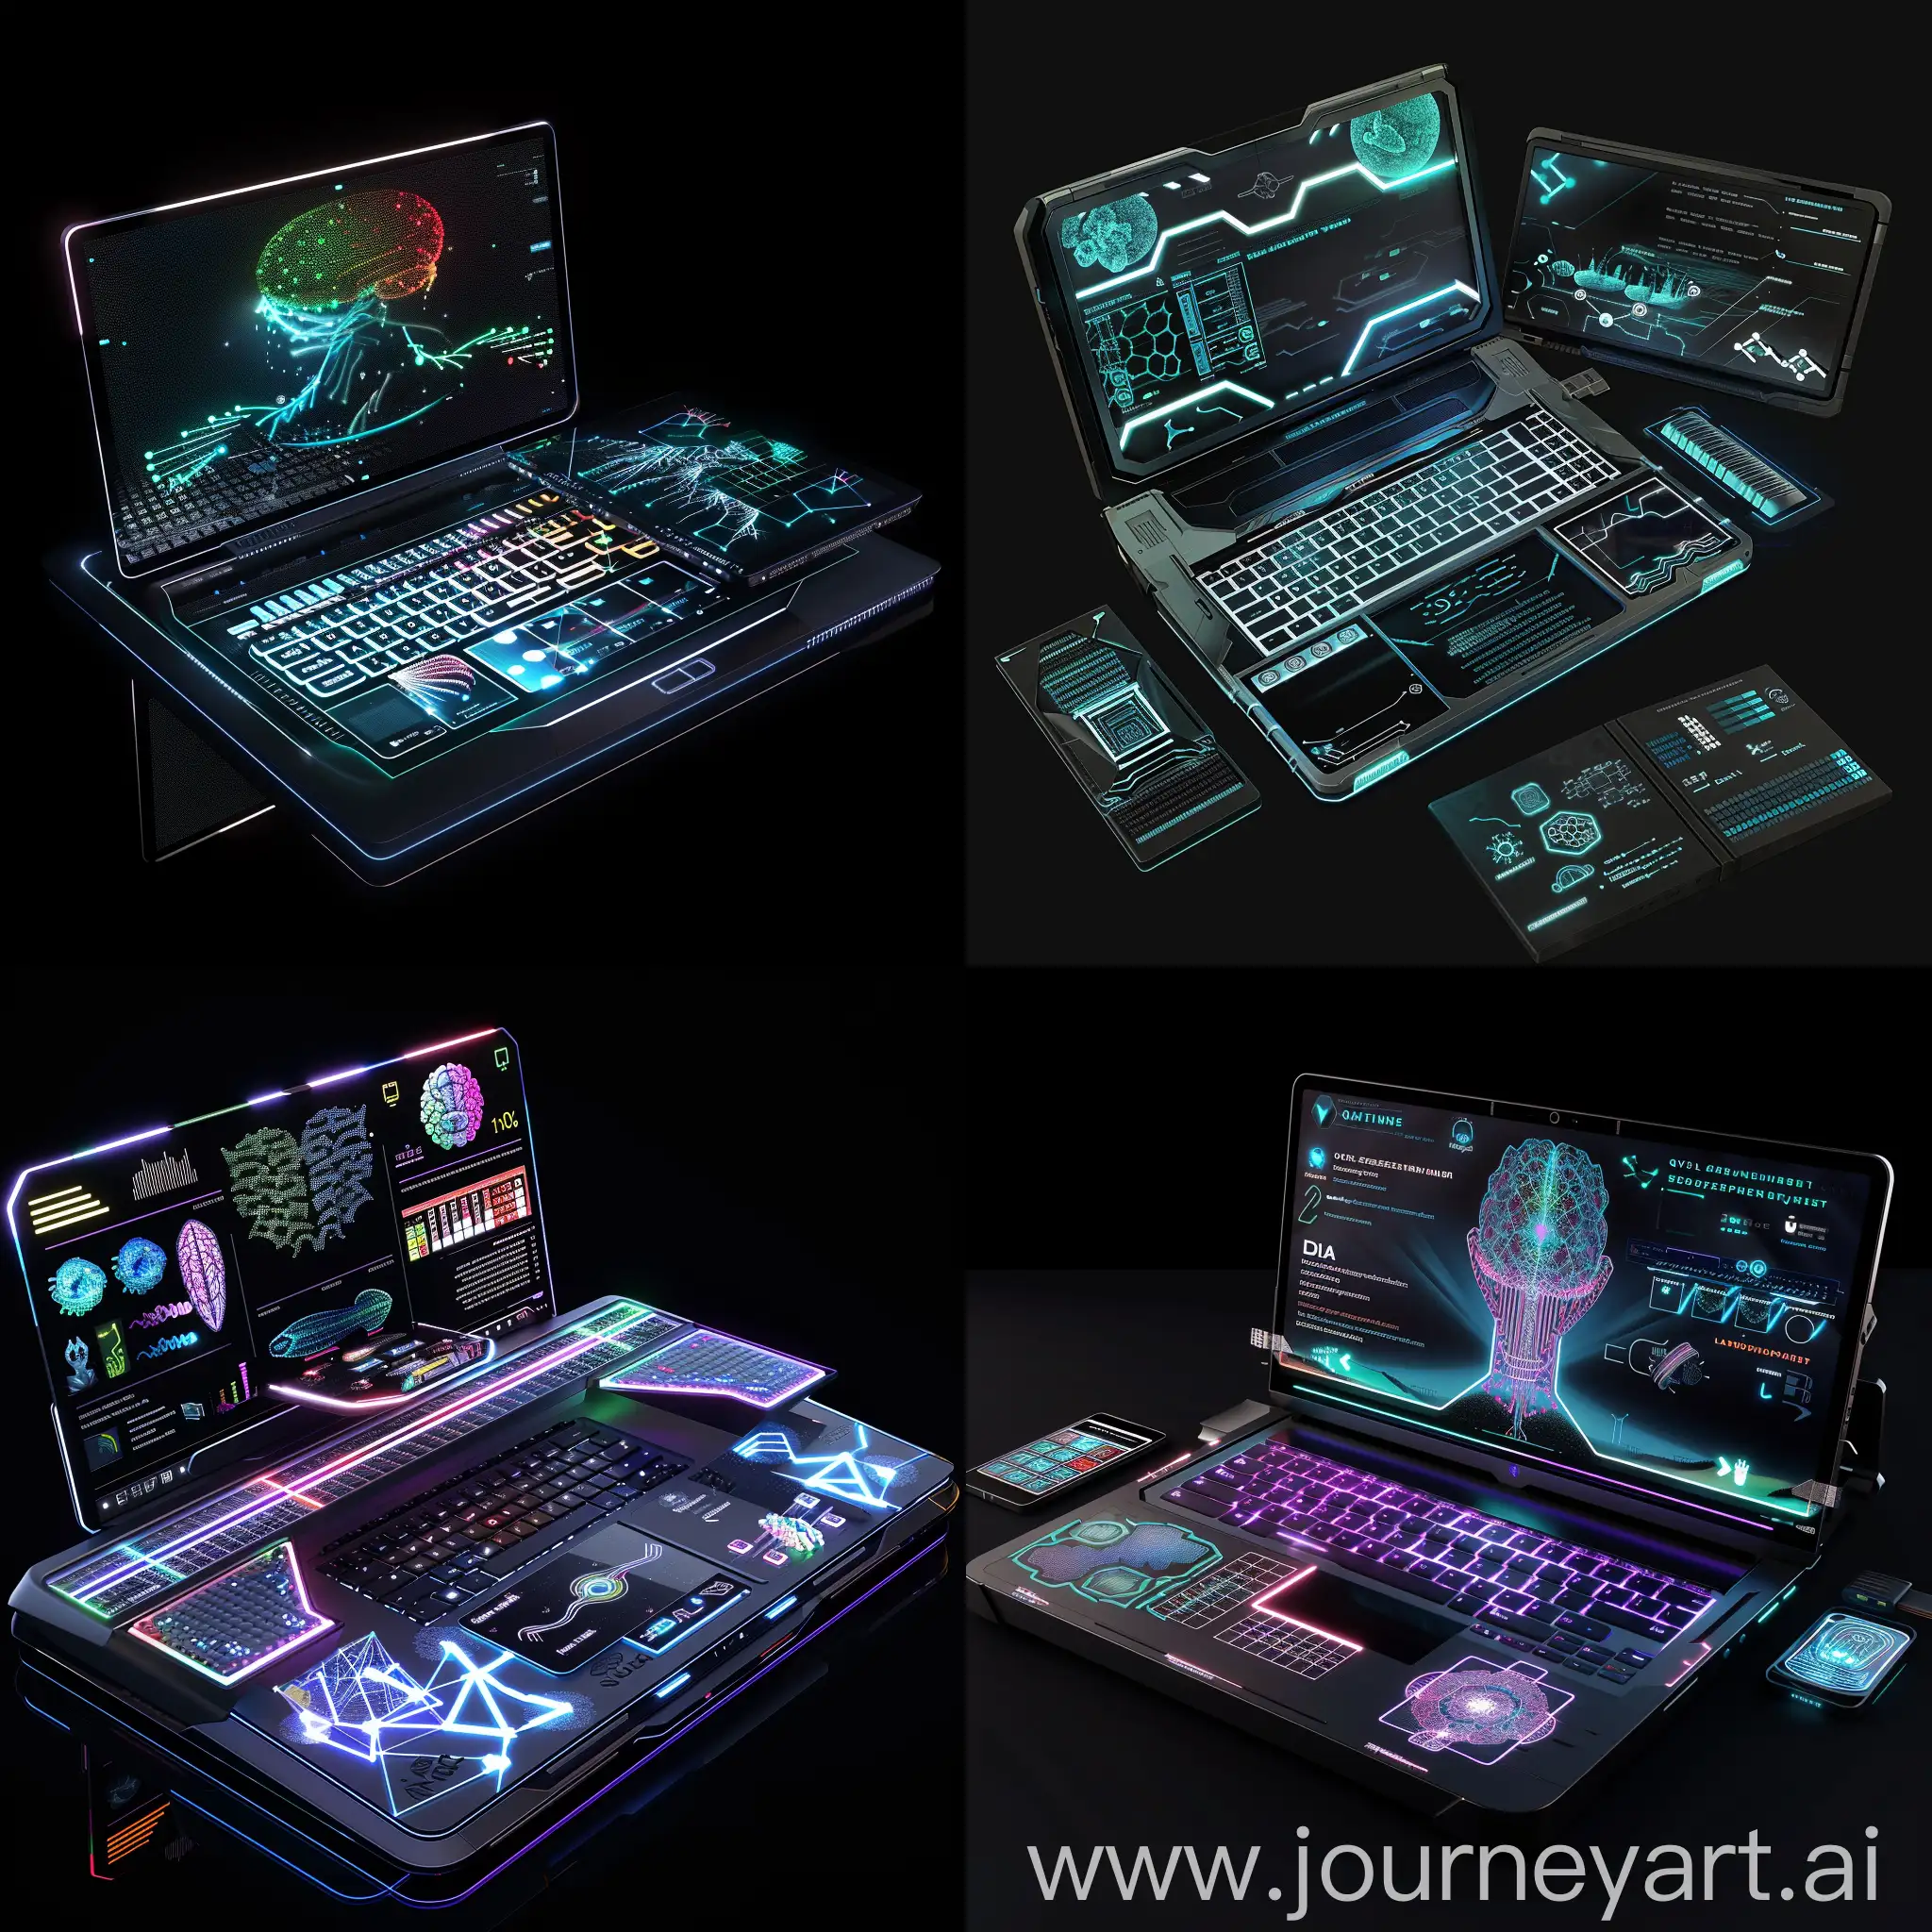 Futuristic-Laptop-with-Quantum-Processor-and-Holographic-Display-Technology